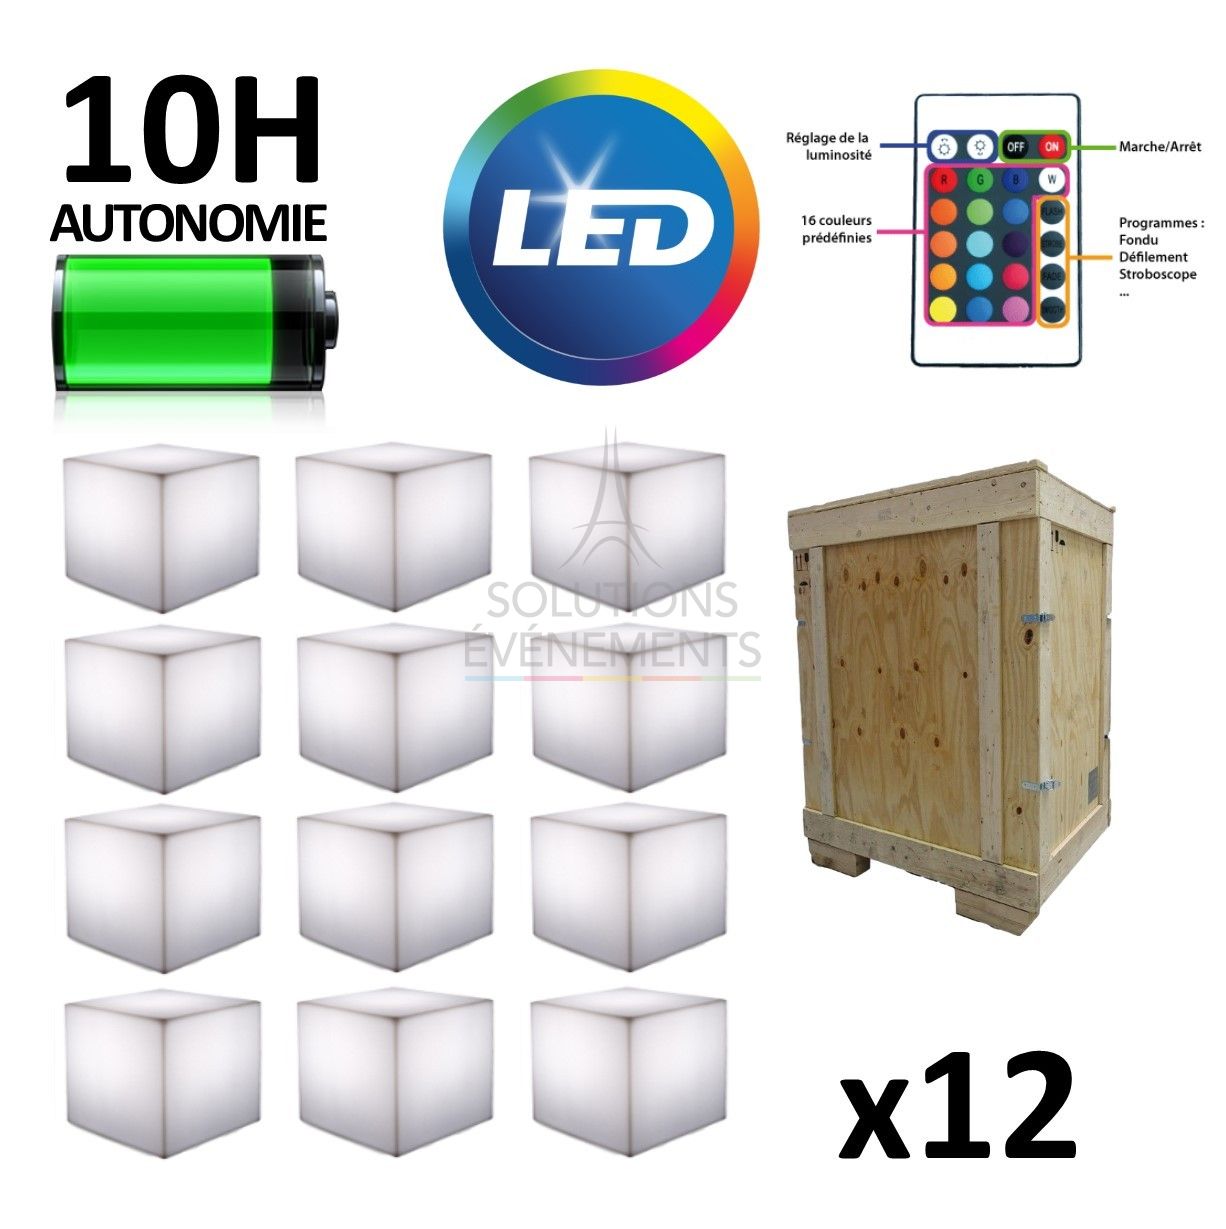 Rental of a pack of 12 wireless LED light cubes